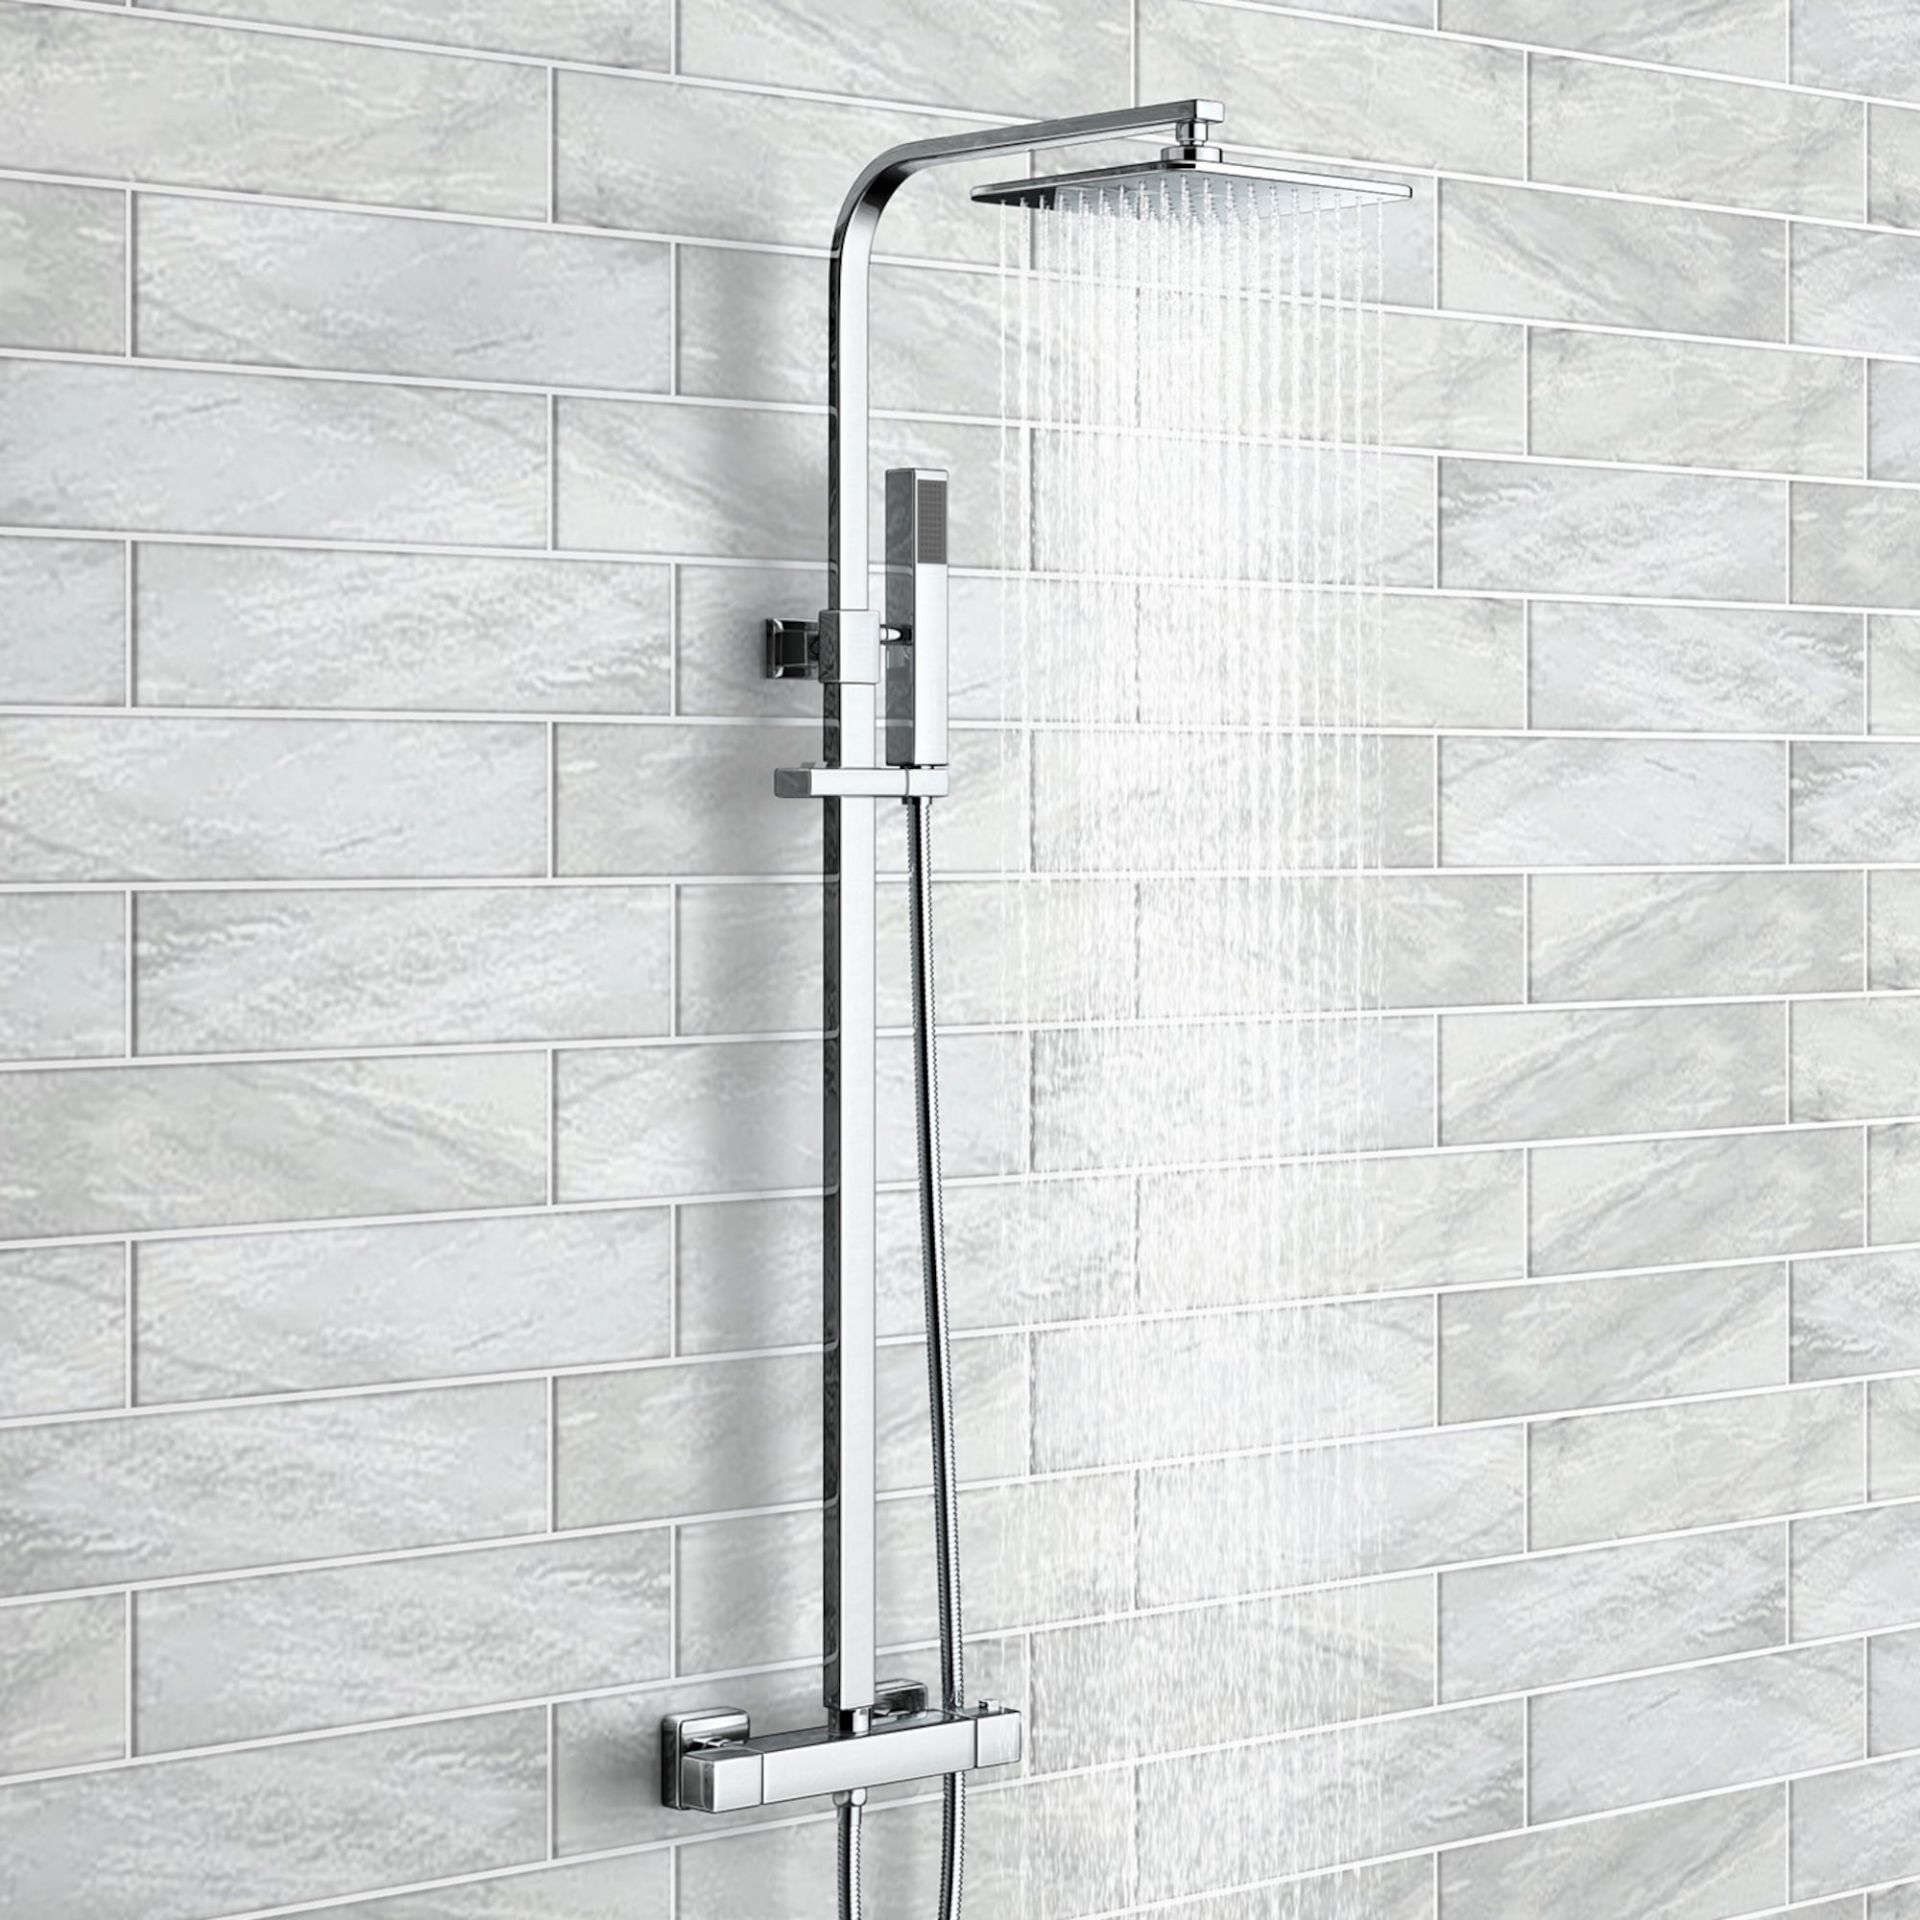 (YC222) Square Exposed Thermostatic Shower Kit & Medium Head- Harper. Angled slim and on-trend